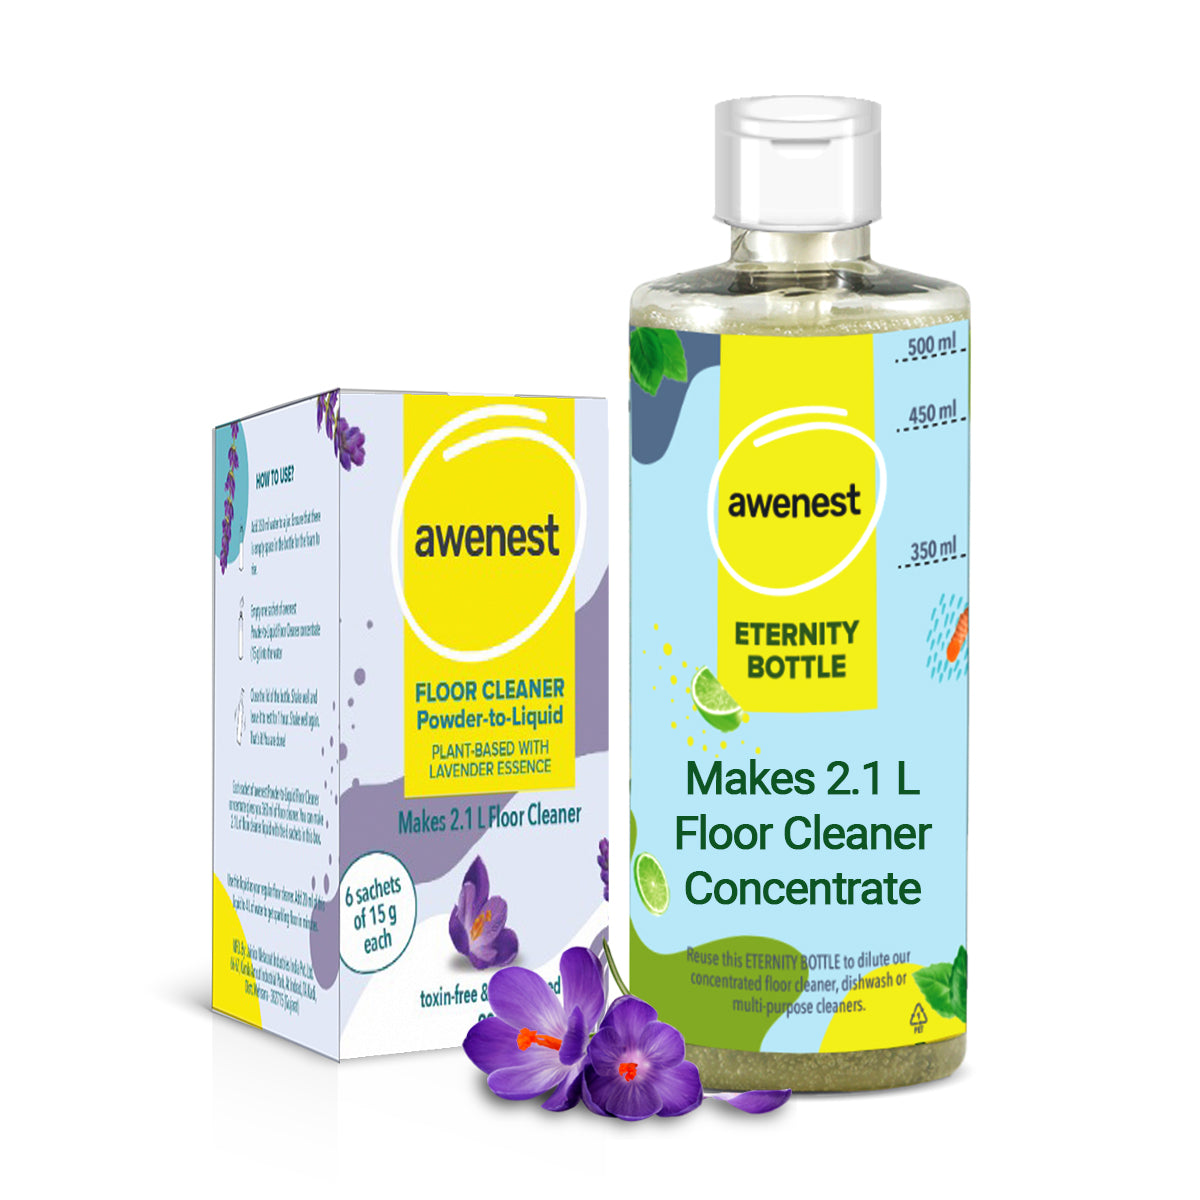 awenest toxin-free, plant-based powder to liquid floor cleaner disinfectant with lavender